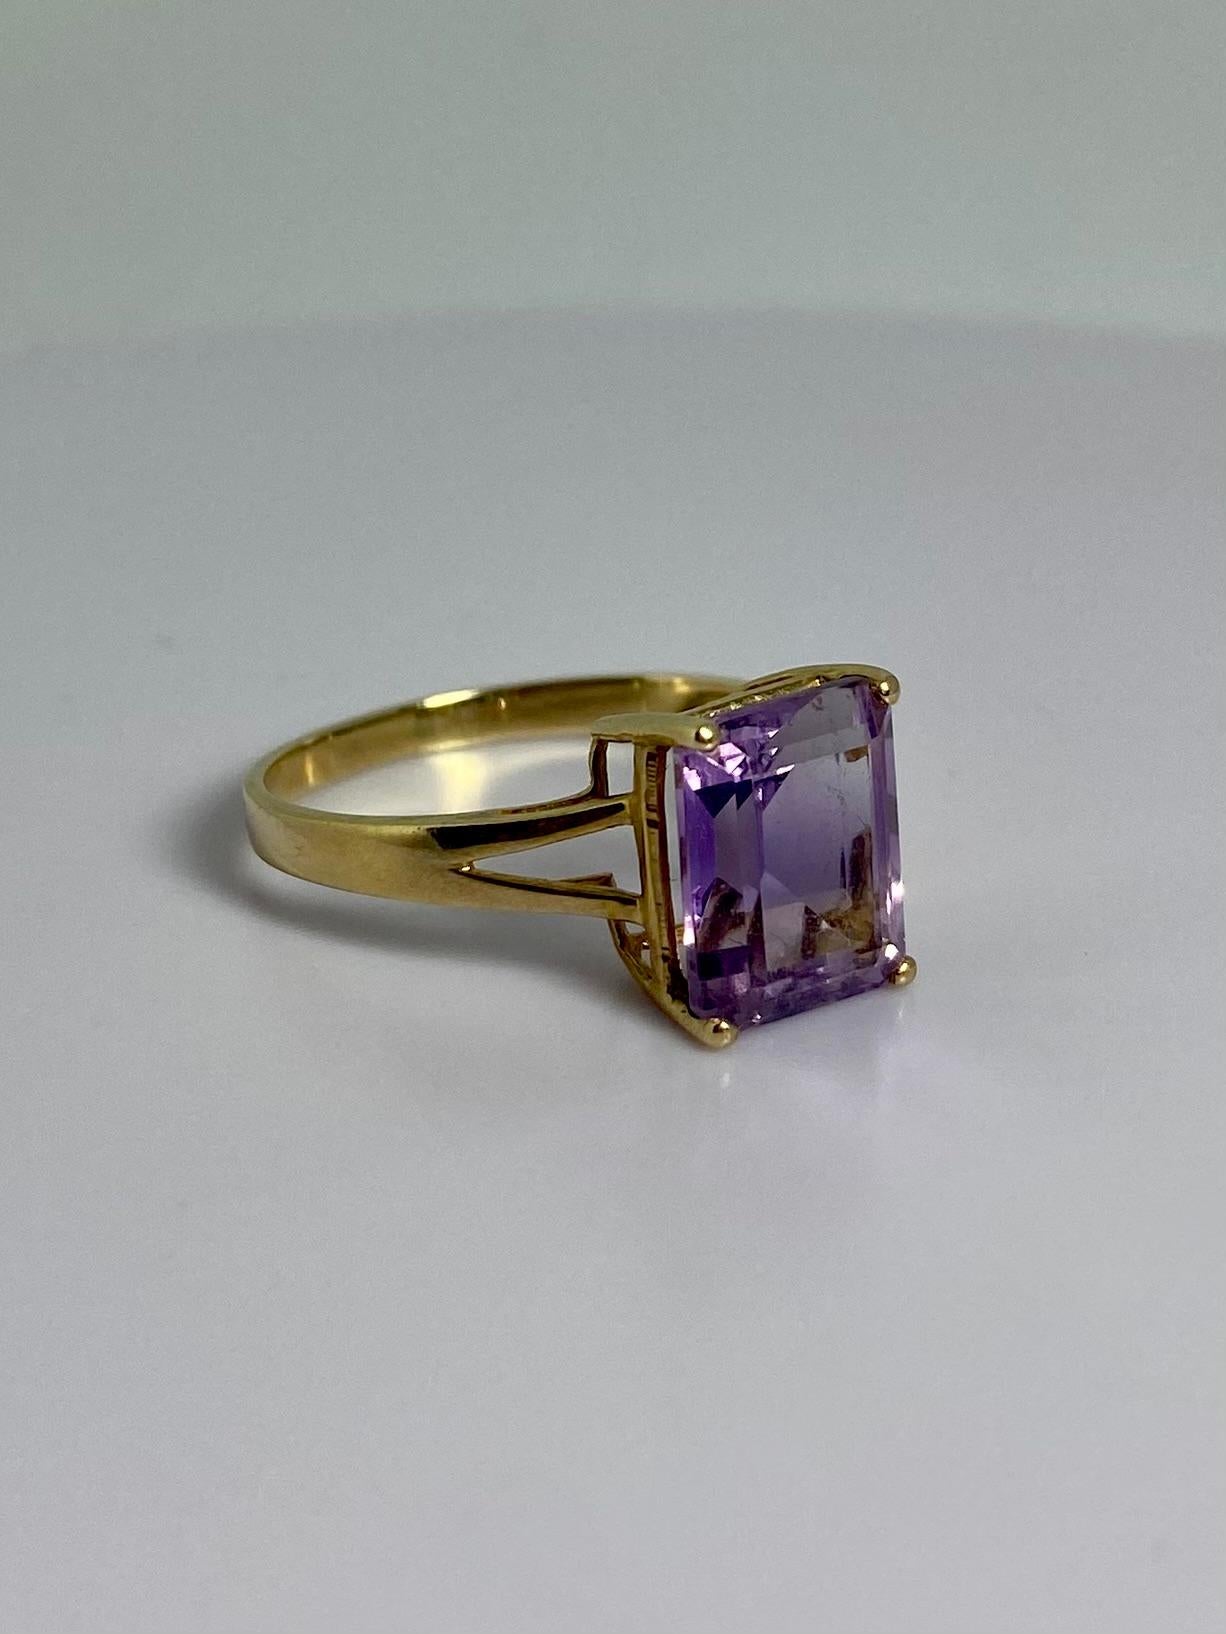 This pre-loved ring gives a chic look in an instant and is an absolute eye-catcher and the natural amethyst makes this ring extra special.  Not only does this ring exude class but is also ideally suited for anyone who likes a statement but still